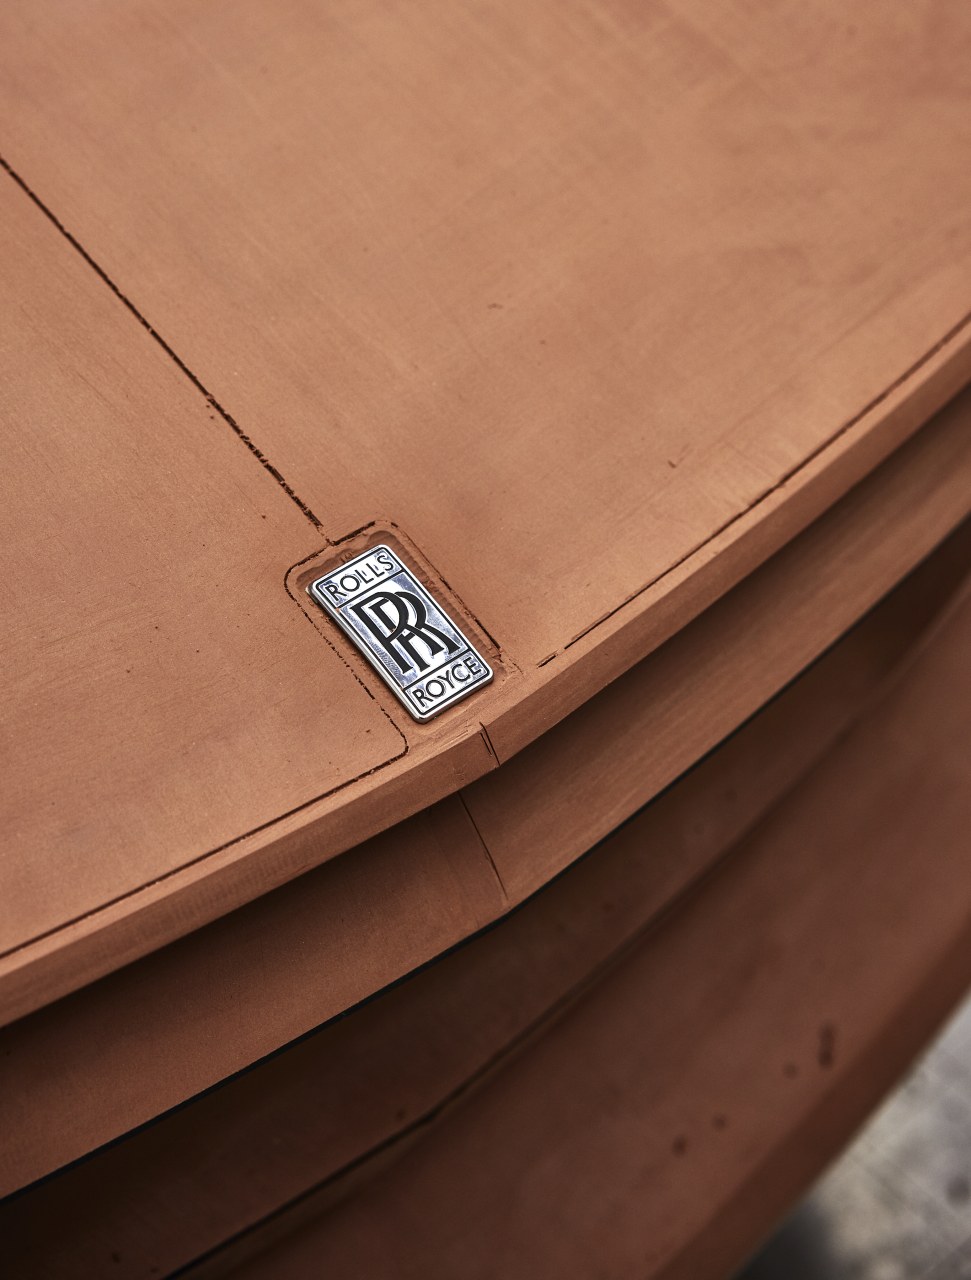 Rolls-Royce's Second Boat Tail Is Brown and Beautiful - CNET